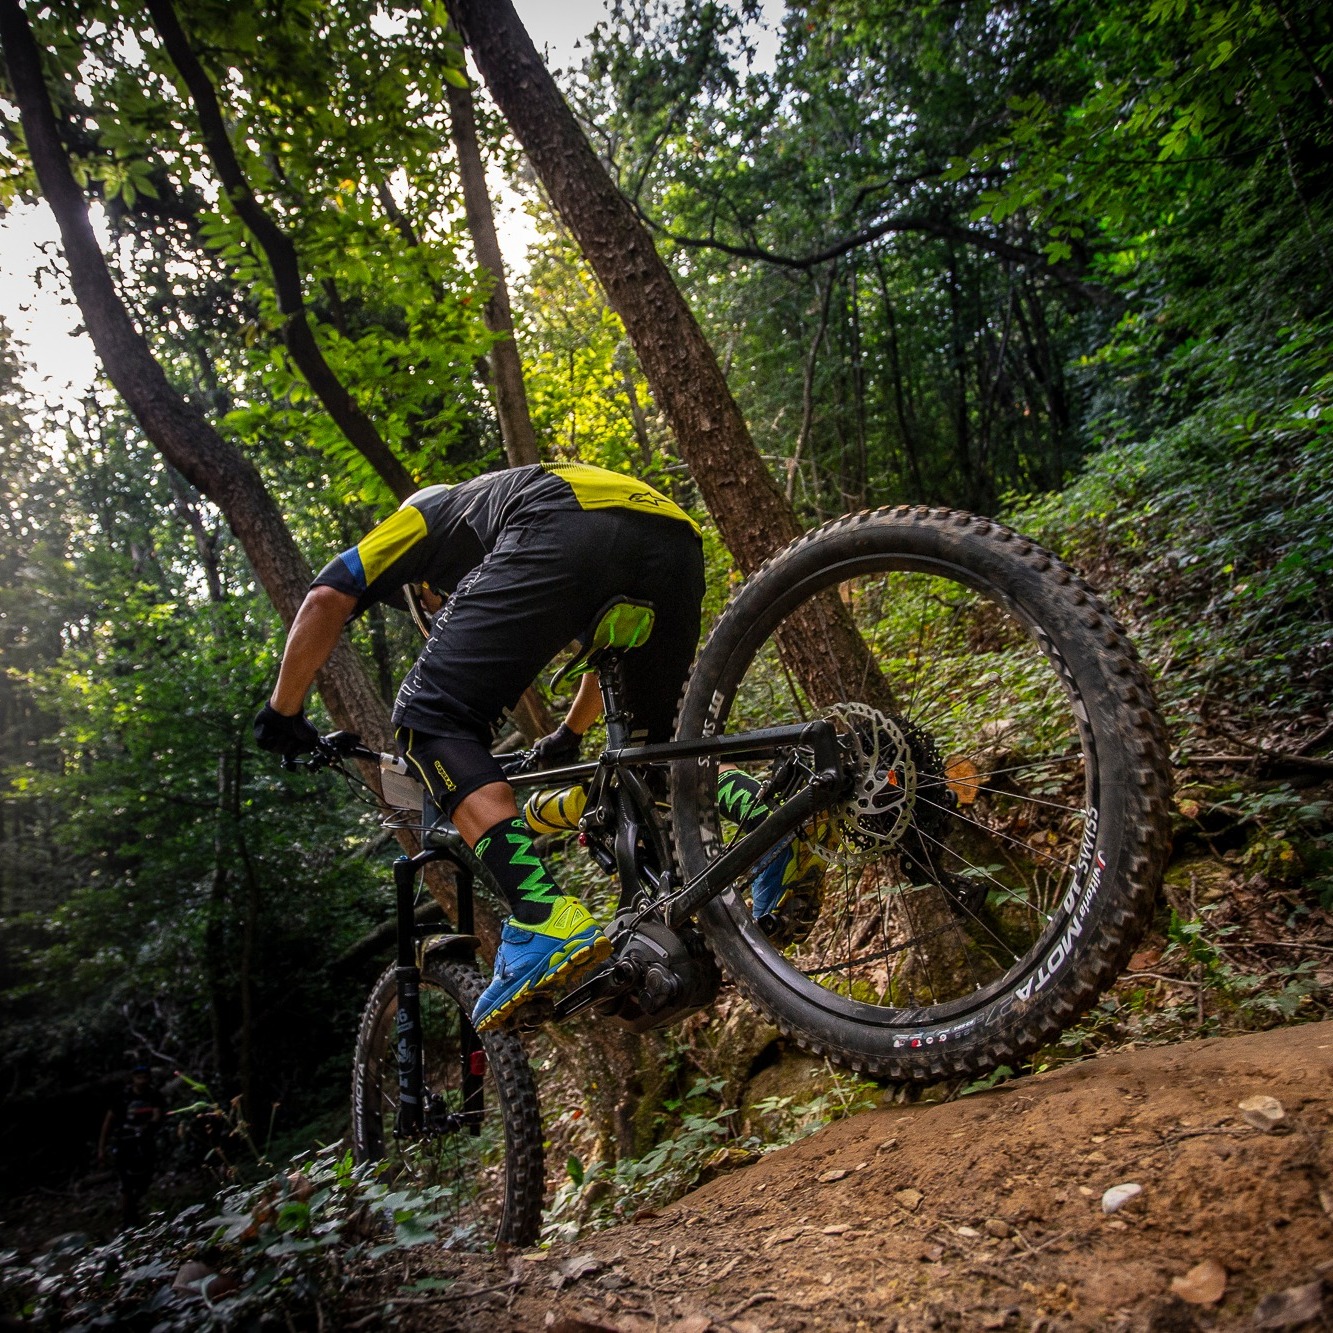 Tubeless Technology in Cross Country Bike Tires